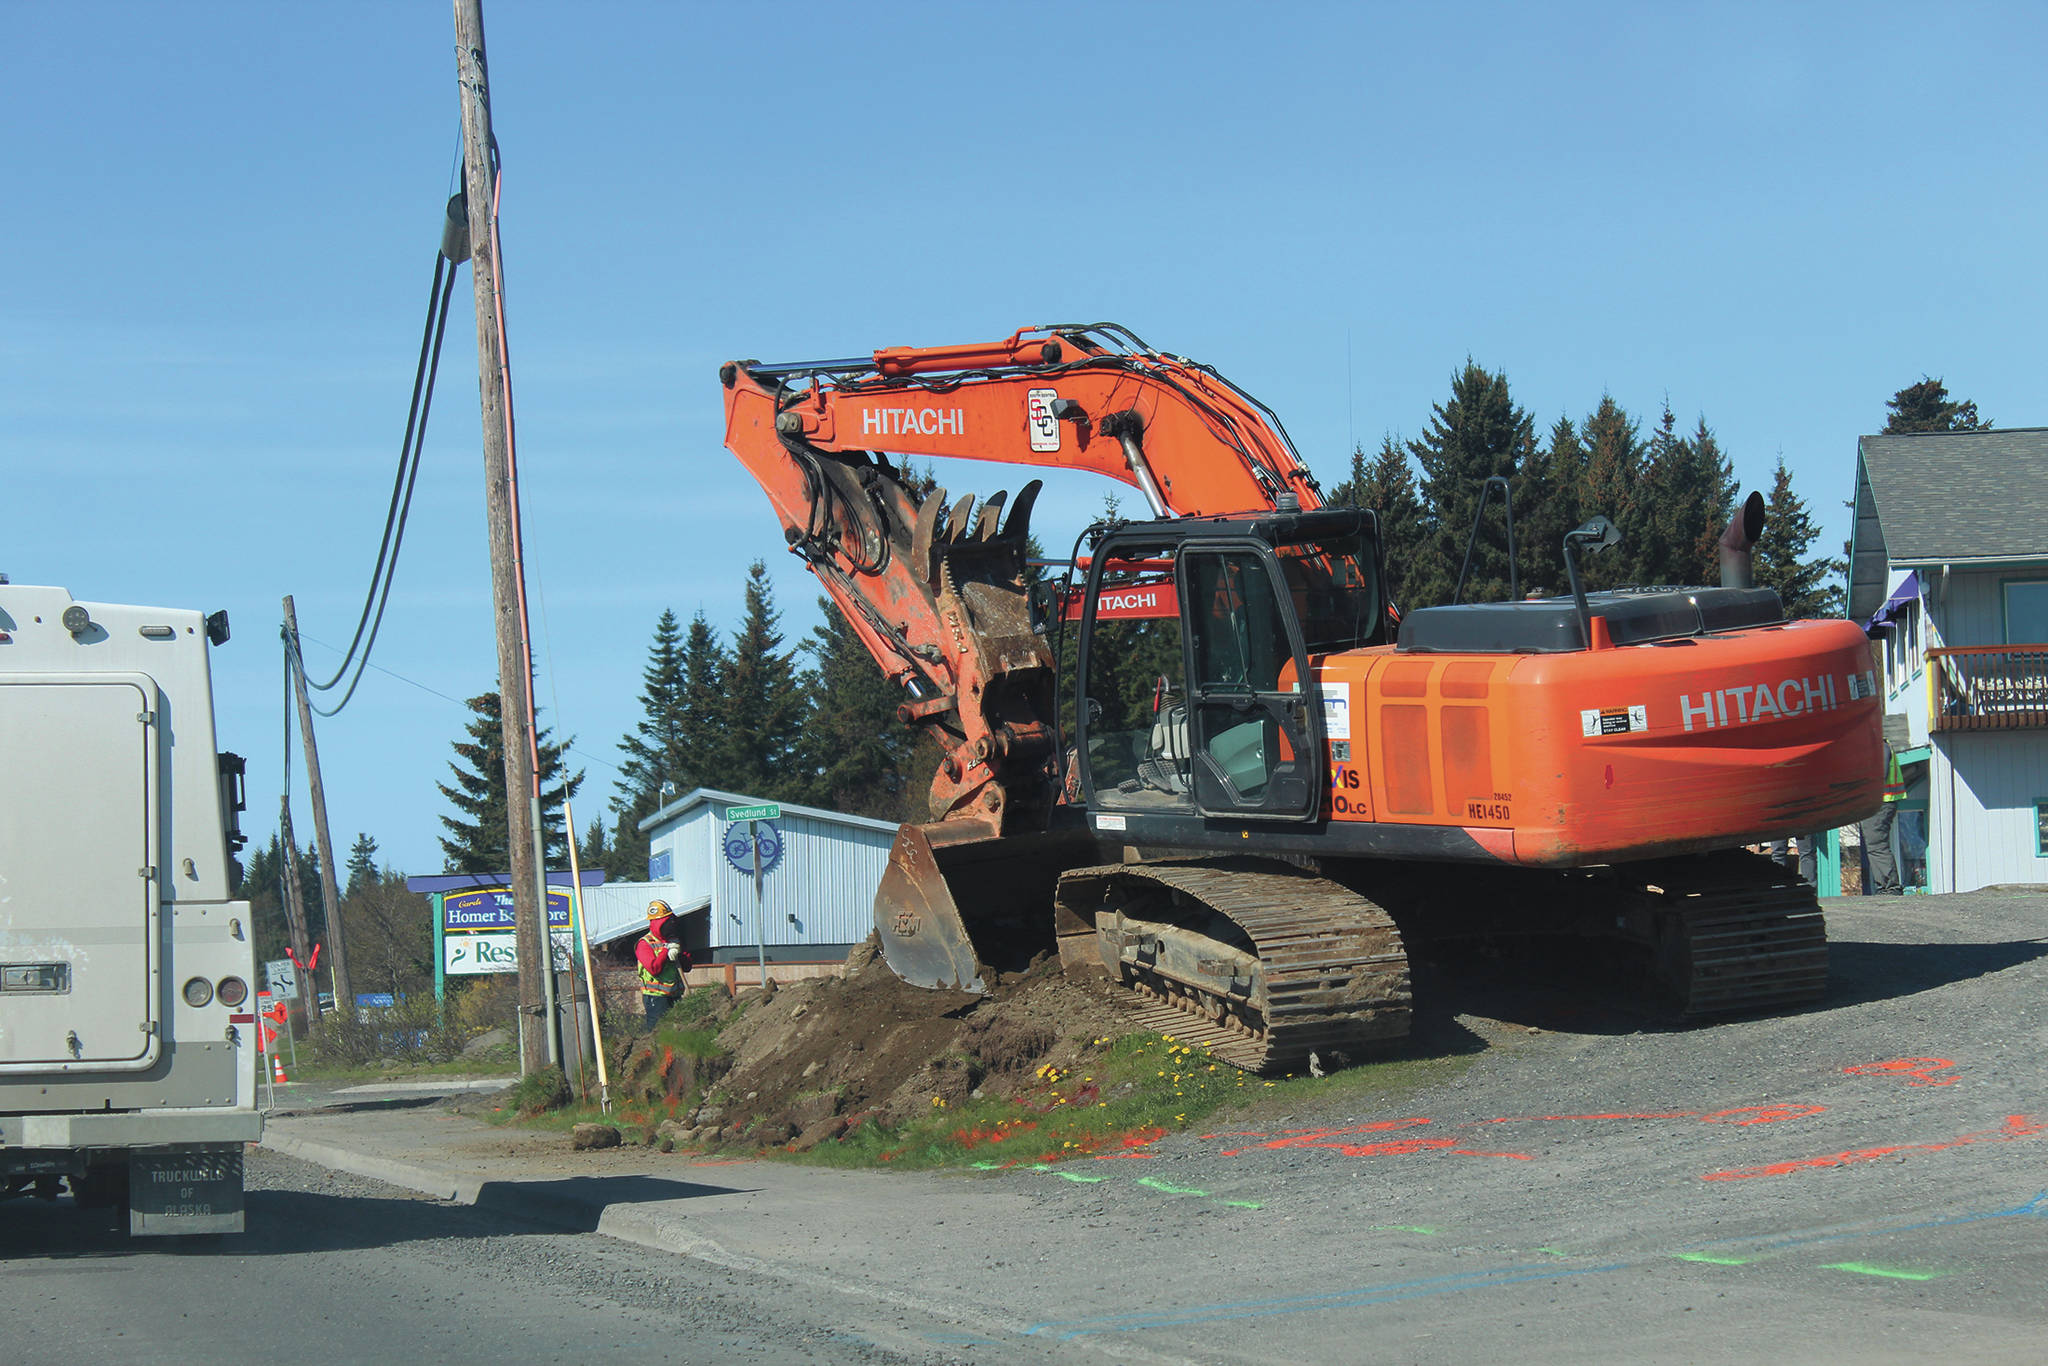 Construction work is performed at the corner of Pioneer Avenue and Svedlund Street on Wednesday, May 13, 2020 in Homer, Alaska. (Photo by Megan Pacer/Homer News)